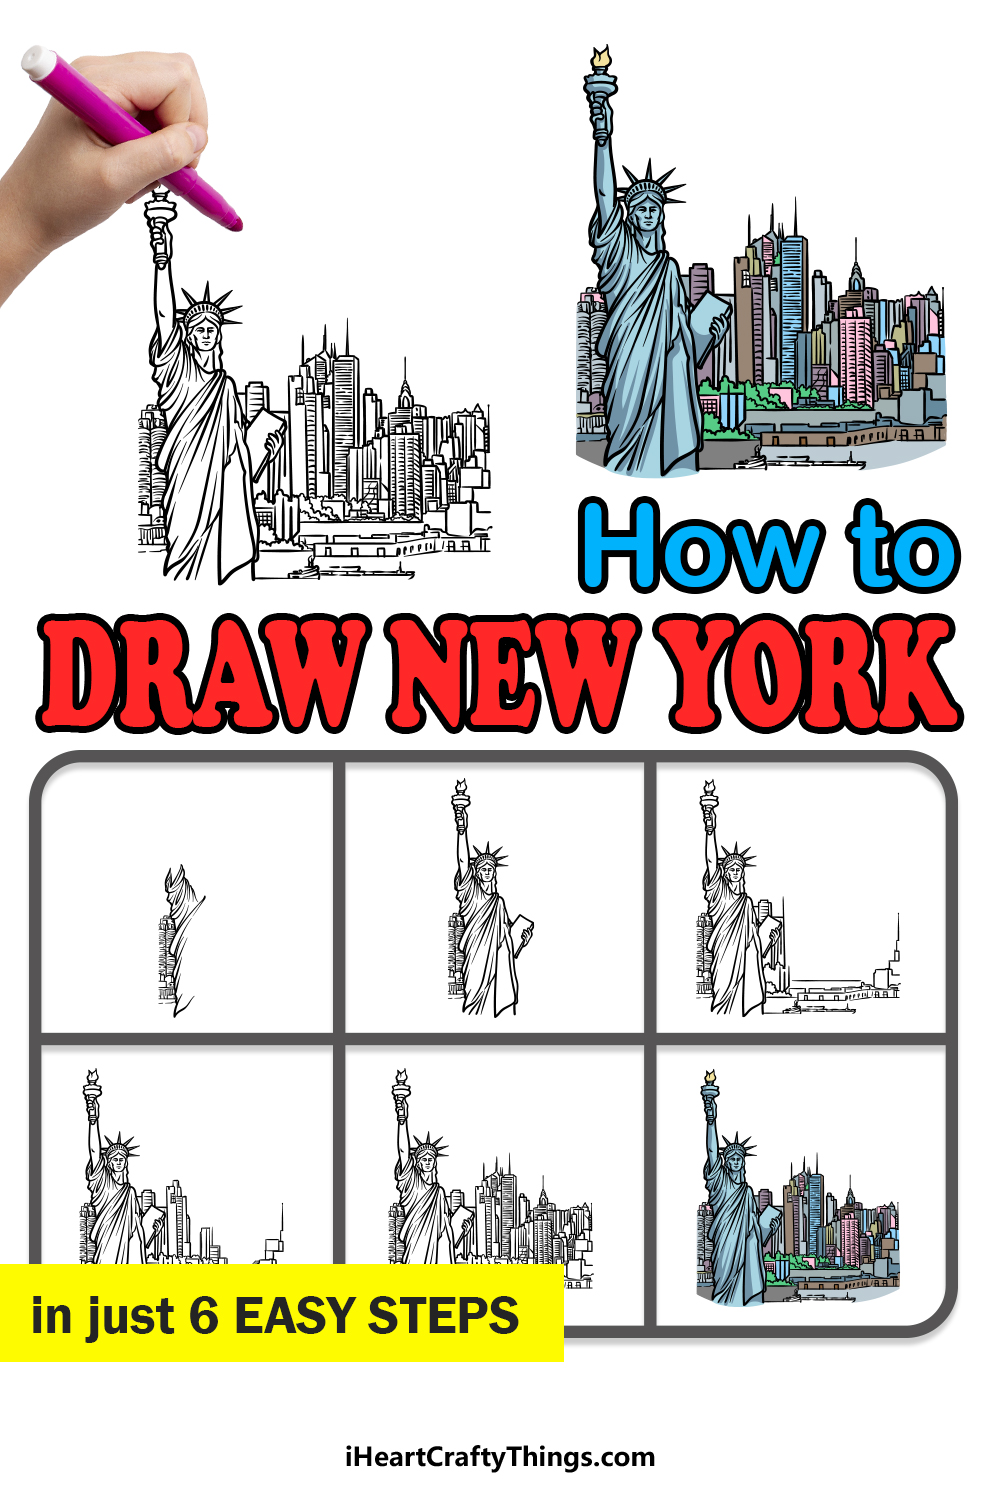 how to draw New York in 6 easy steps